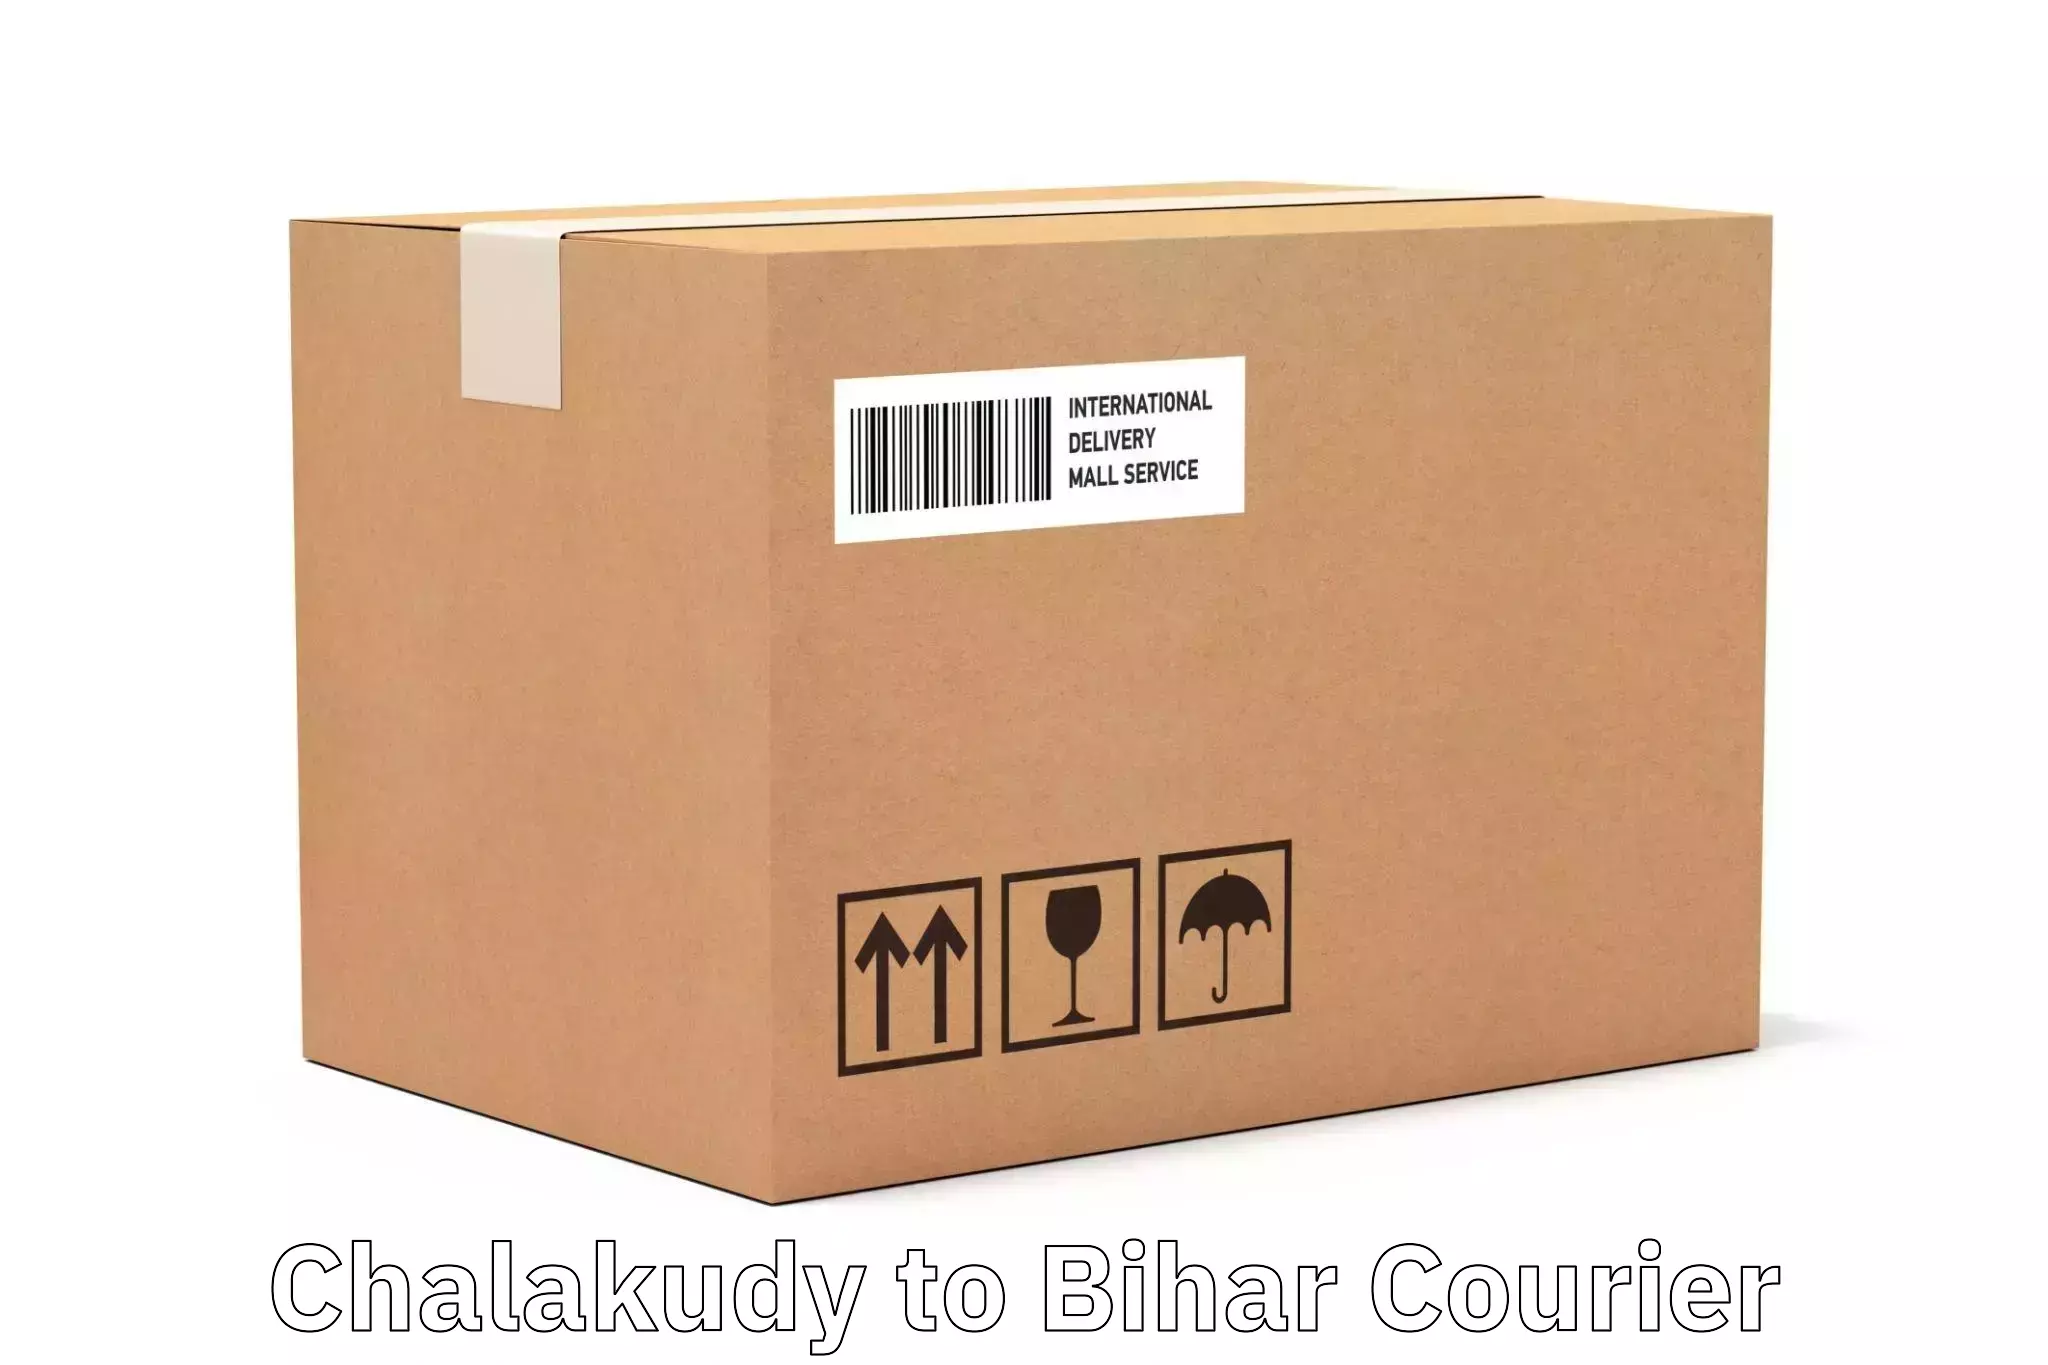 Fast delivery service in Chalakudy to Sheikhpura